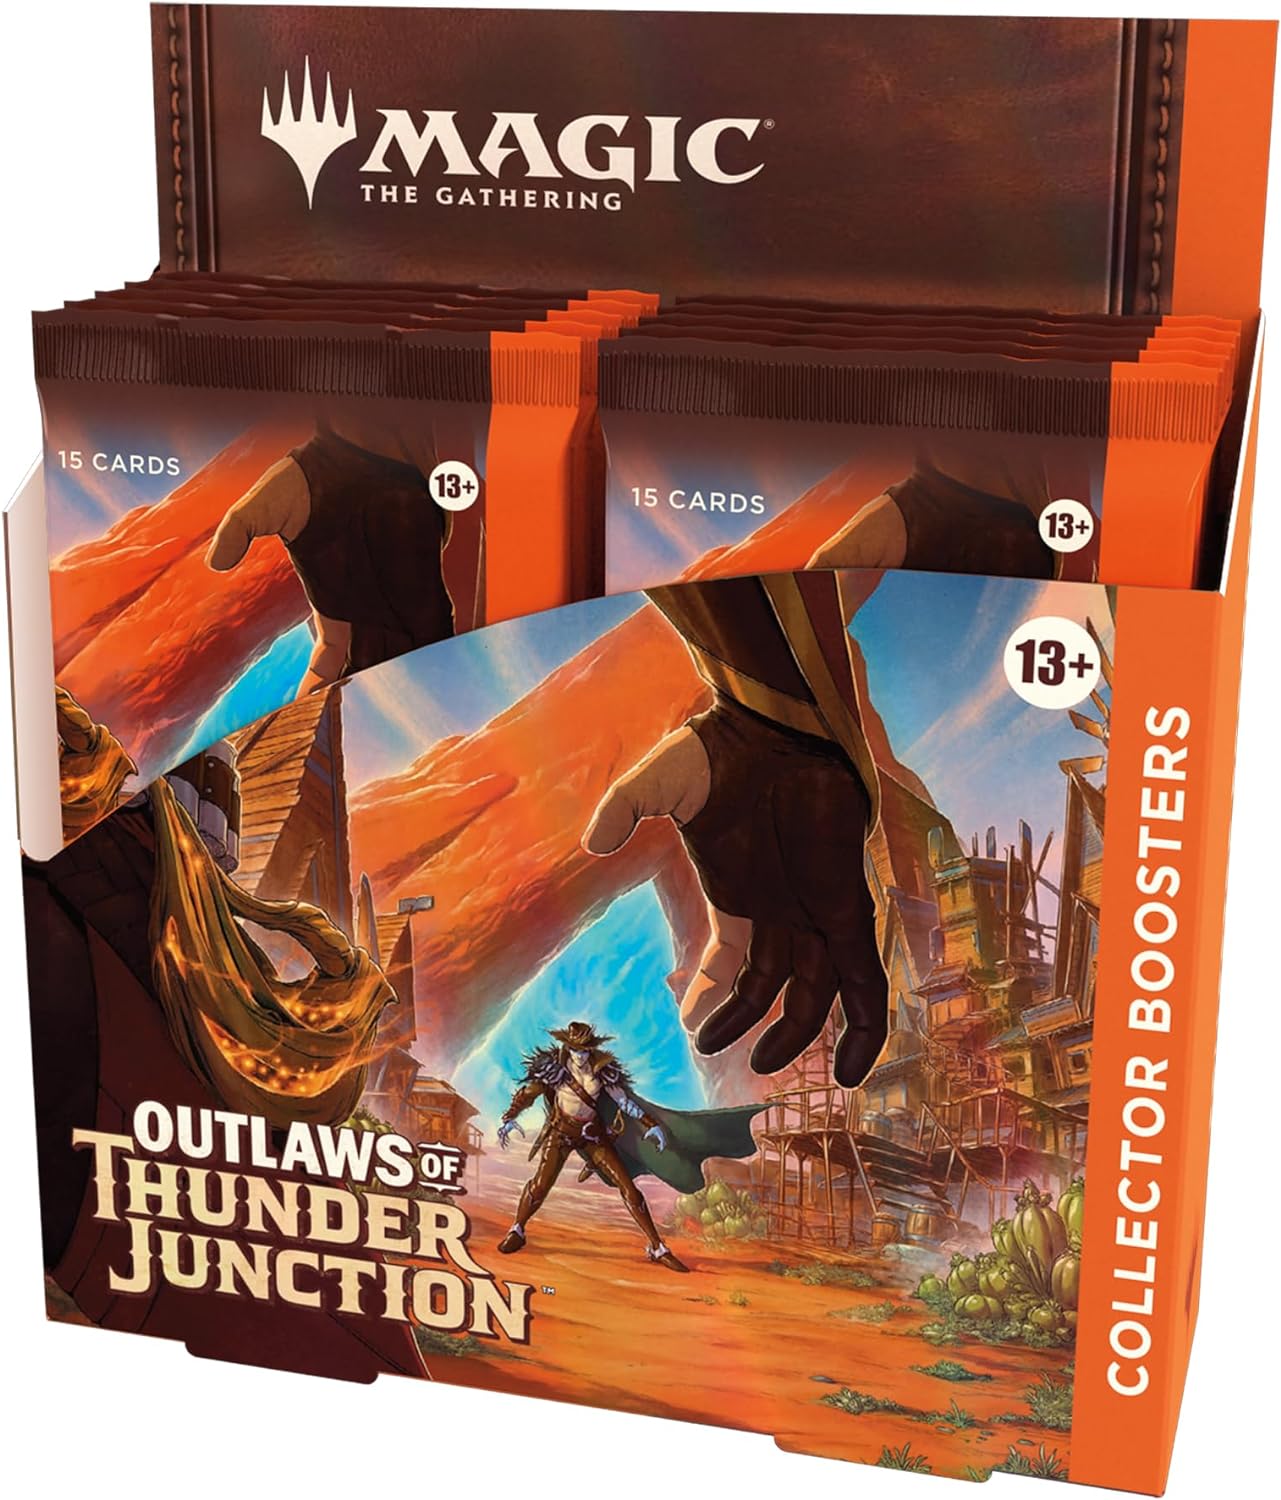 Magic : The Gathering - Outlaws of Thunder Junction Collector Booster Box MKP00GSNUT |0|